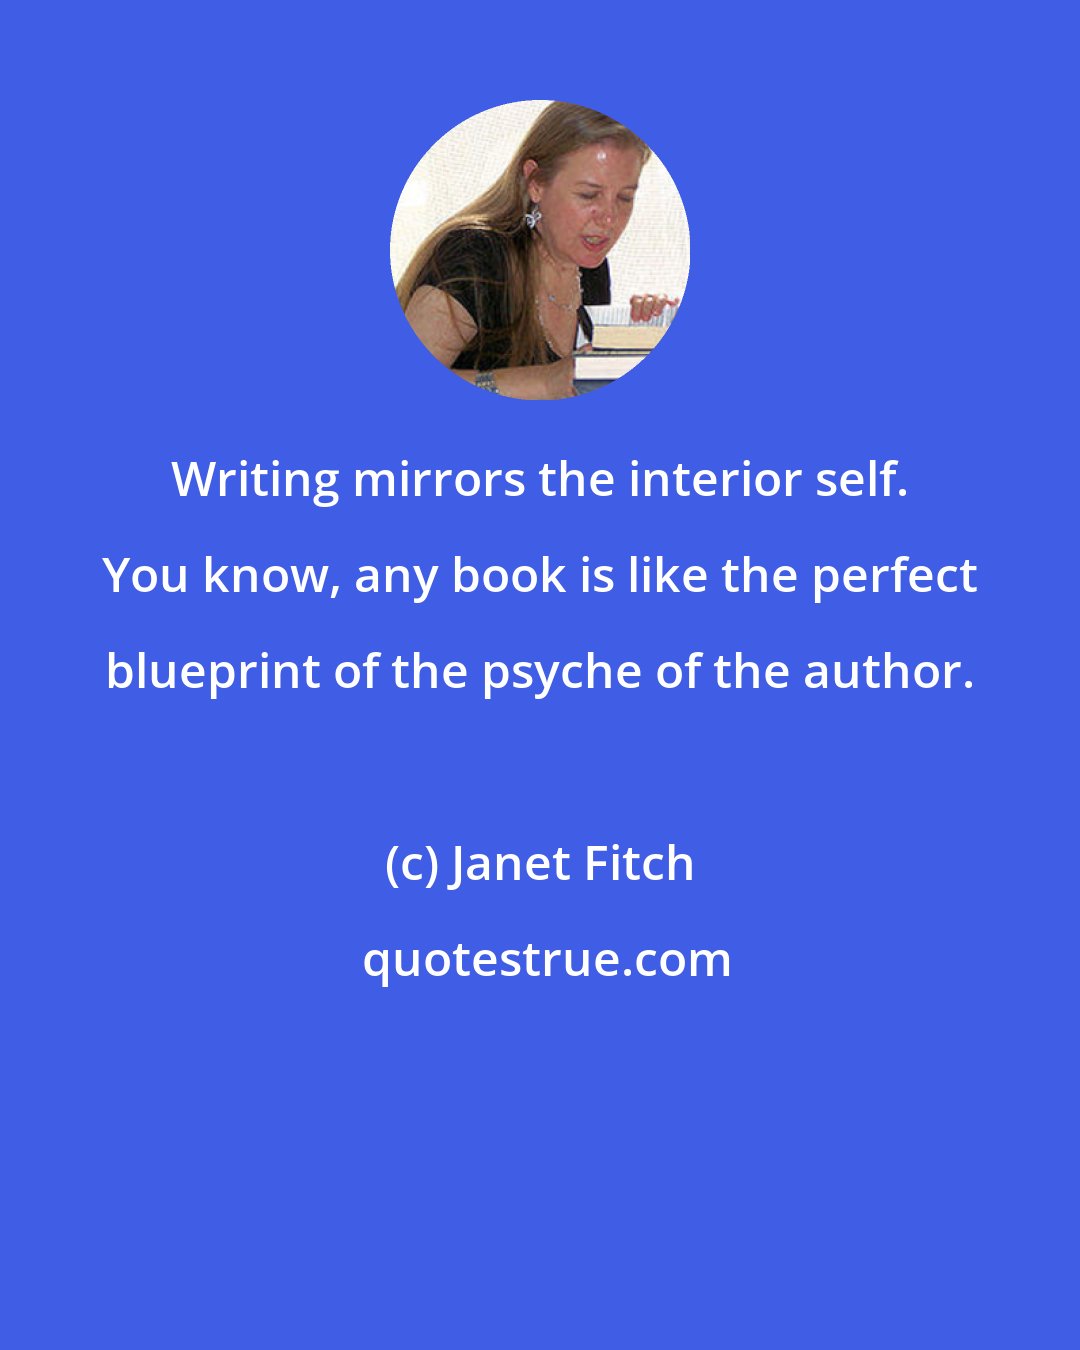 Janet Fitch: Writing mirrors the interior self. You know, any book is like the perfect blueprint of the psyche of the author.